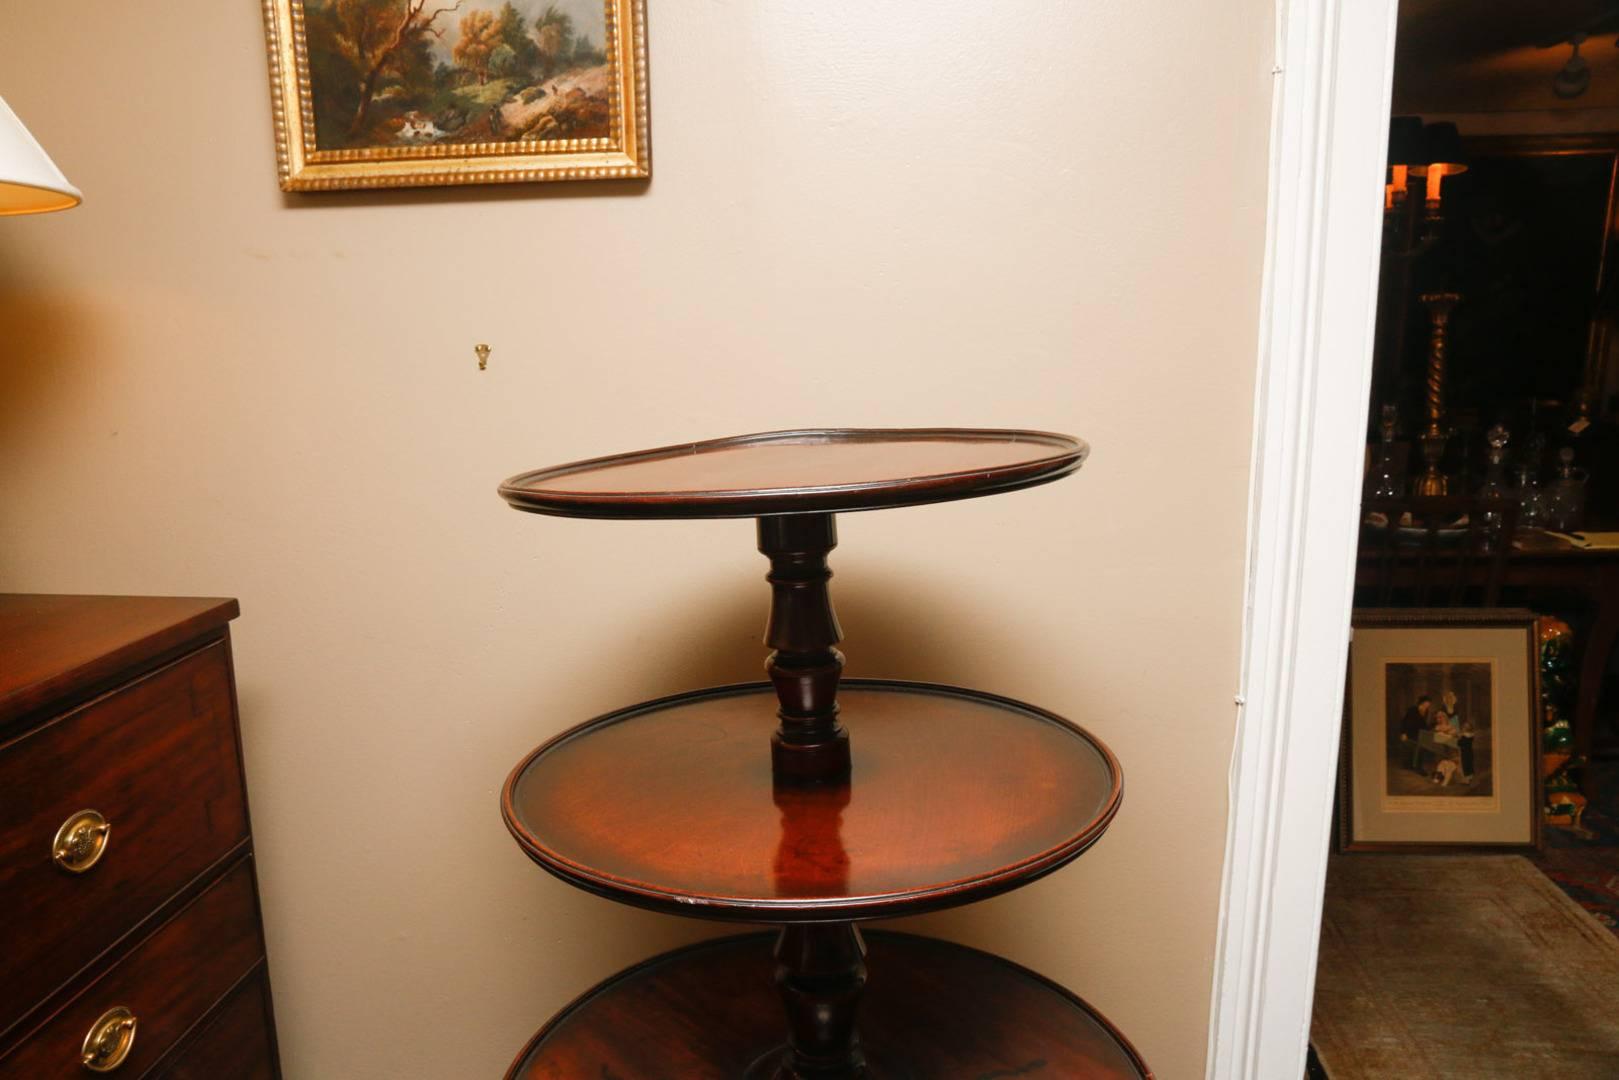 English Regency period (1811-1820) dumbwaiter in mahogany with three circular tiers supported by a central turned shaft and resting on three splayed legs ending in plain brass box caps with casters. The upper section measures 19 inches in diameter